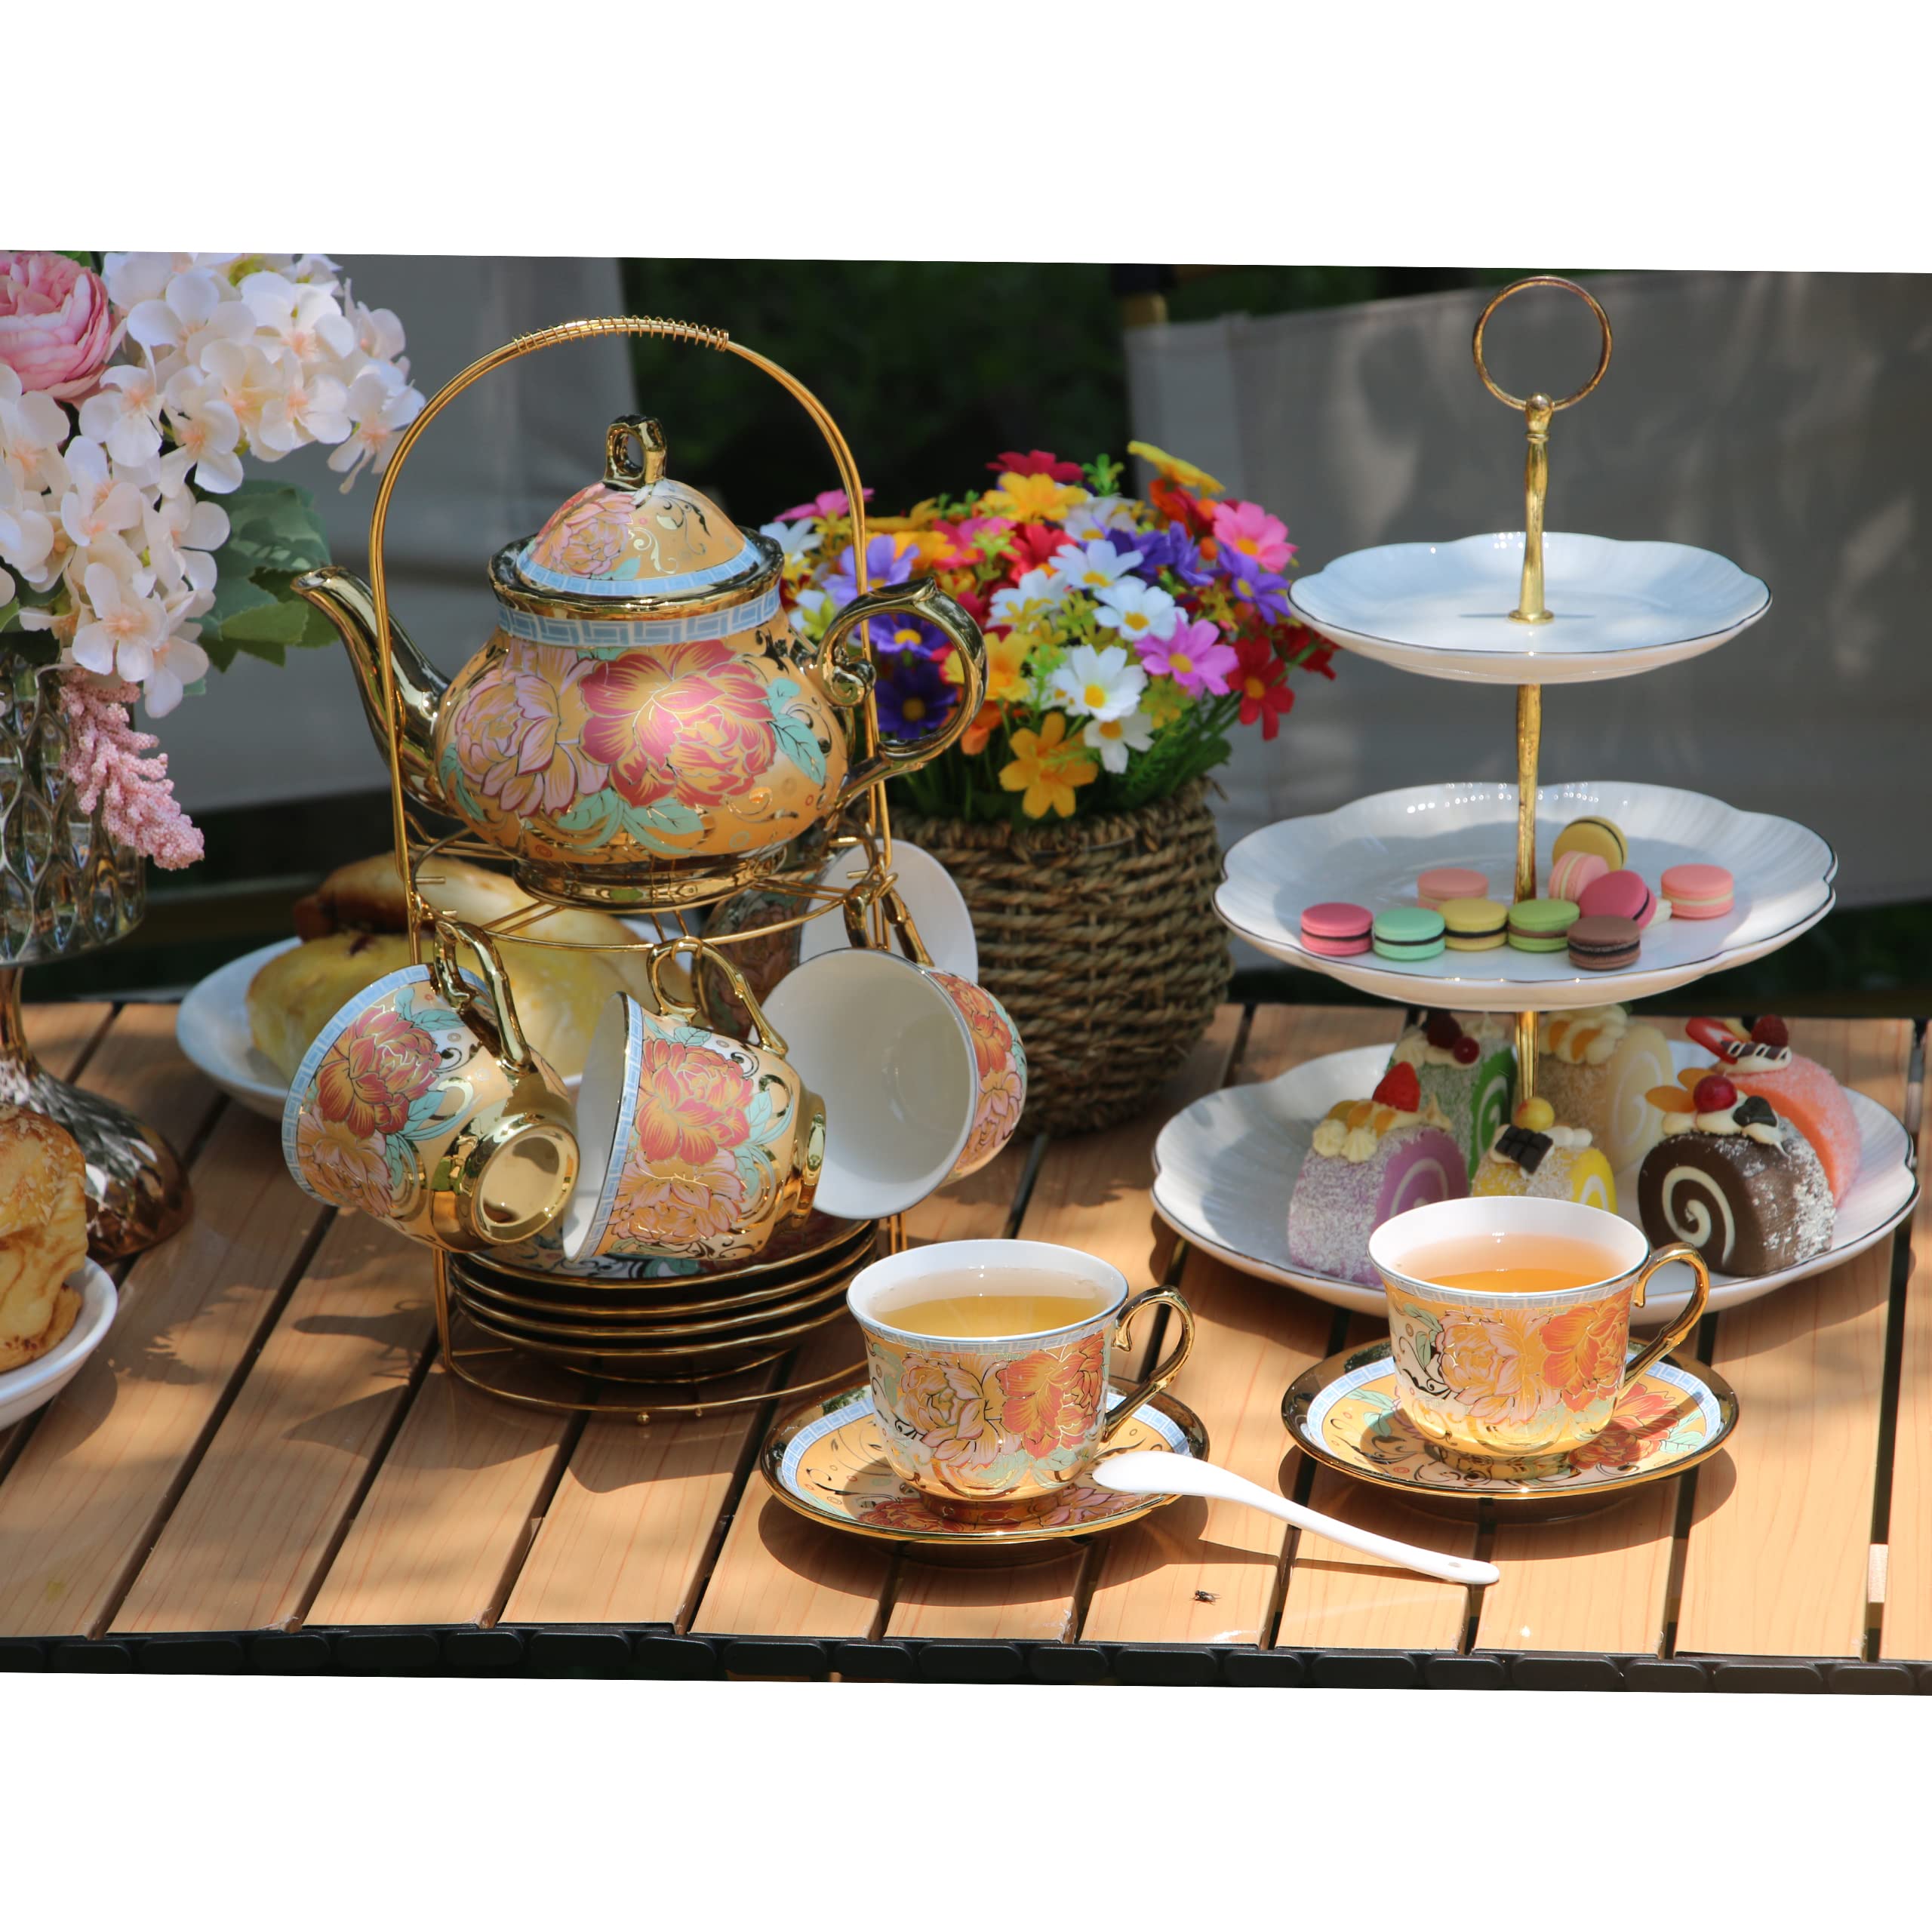 20 Pieces European Ceramic Tea Set for Adults With Metal Holder and Flower Painting (Large Cream Version)